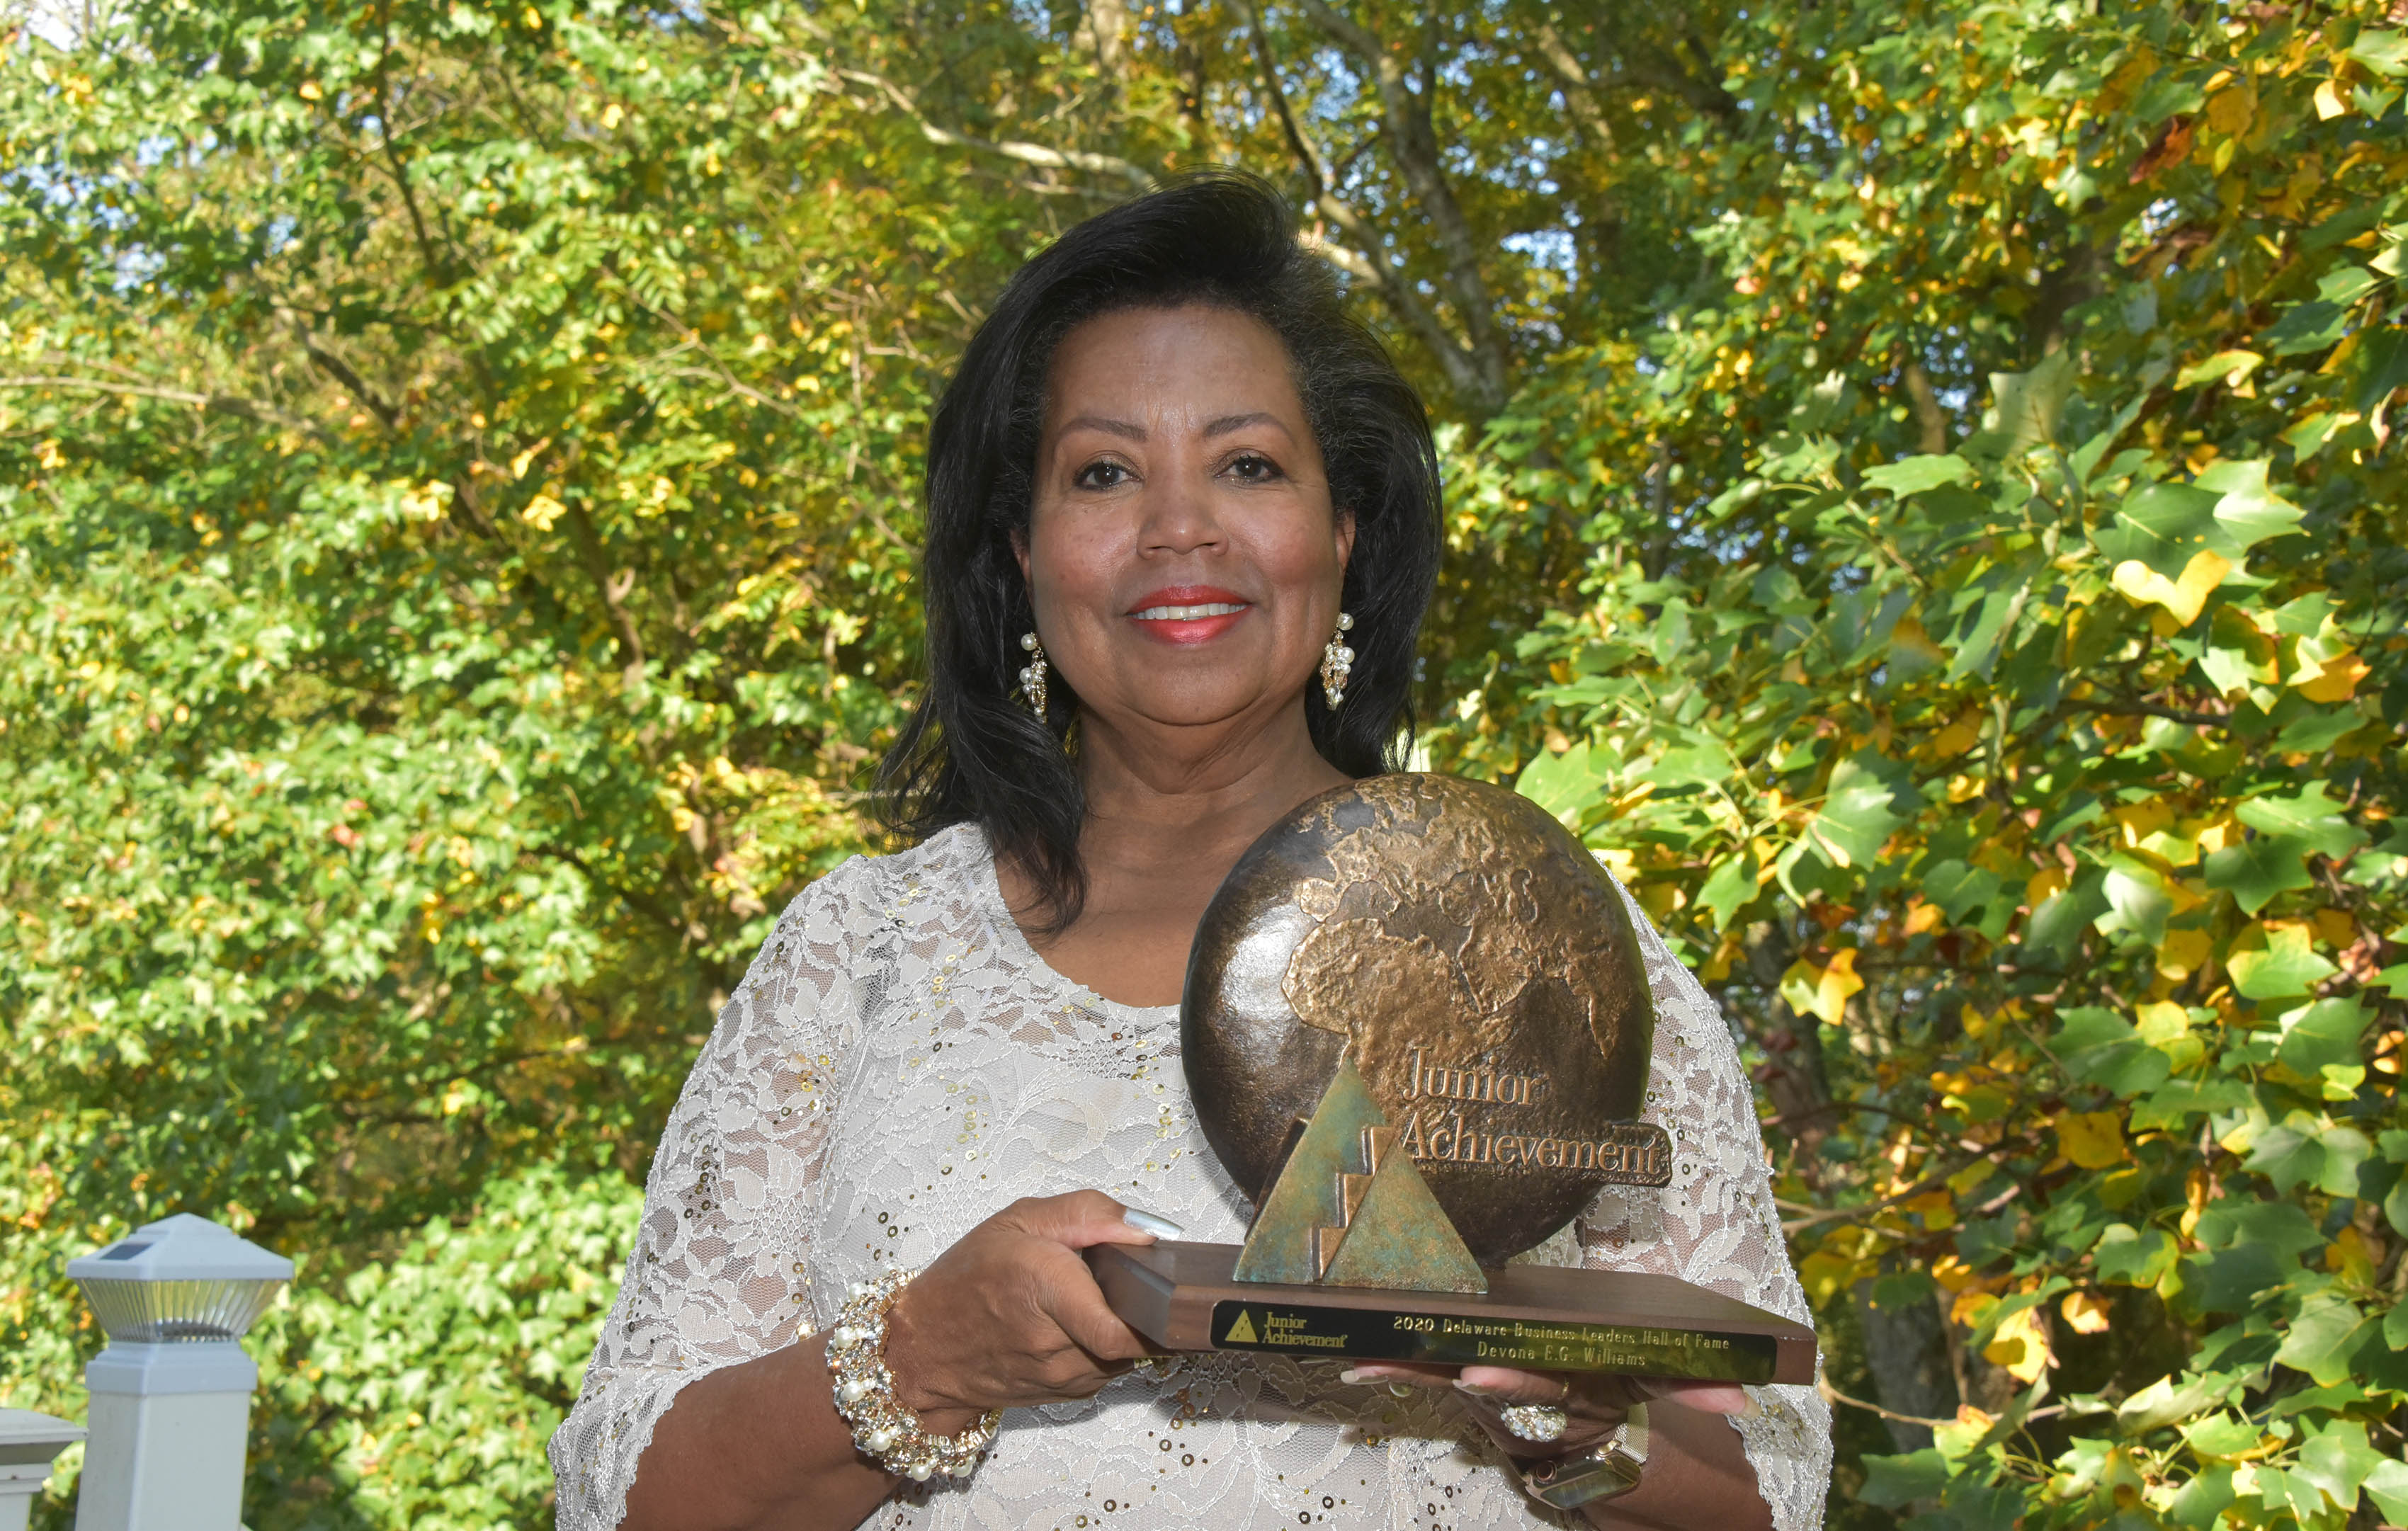 Dr. Devona Williams, University Board of Trustees Chairperson and founder and President/CEO of Goeins-Williams Associates, Inc., holds the award presented to upon her recent induction into the Delaware Business Hall of Fame.